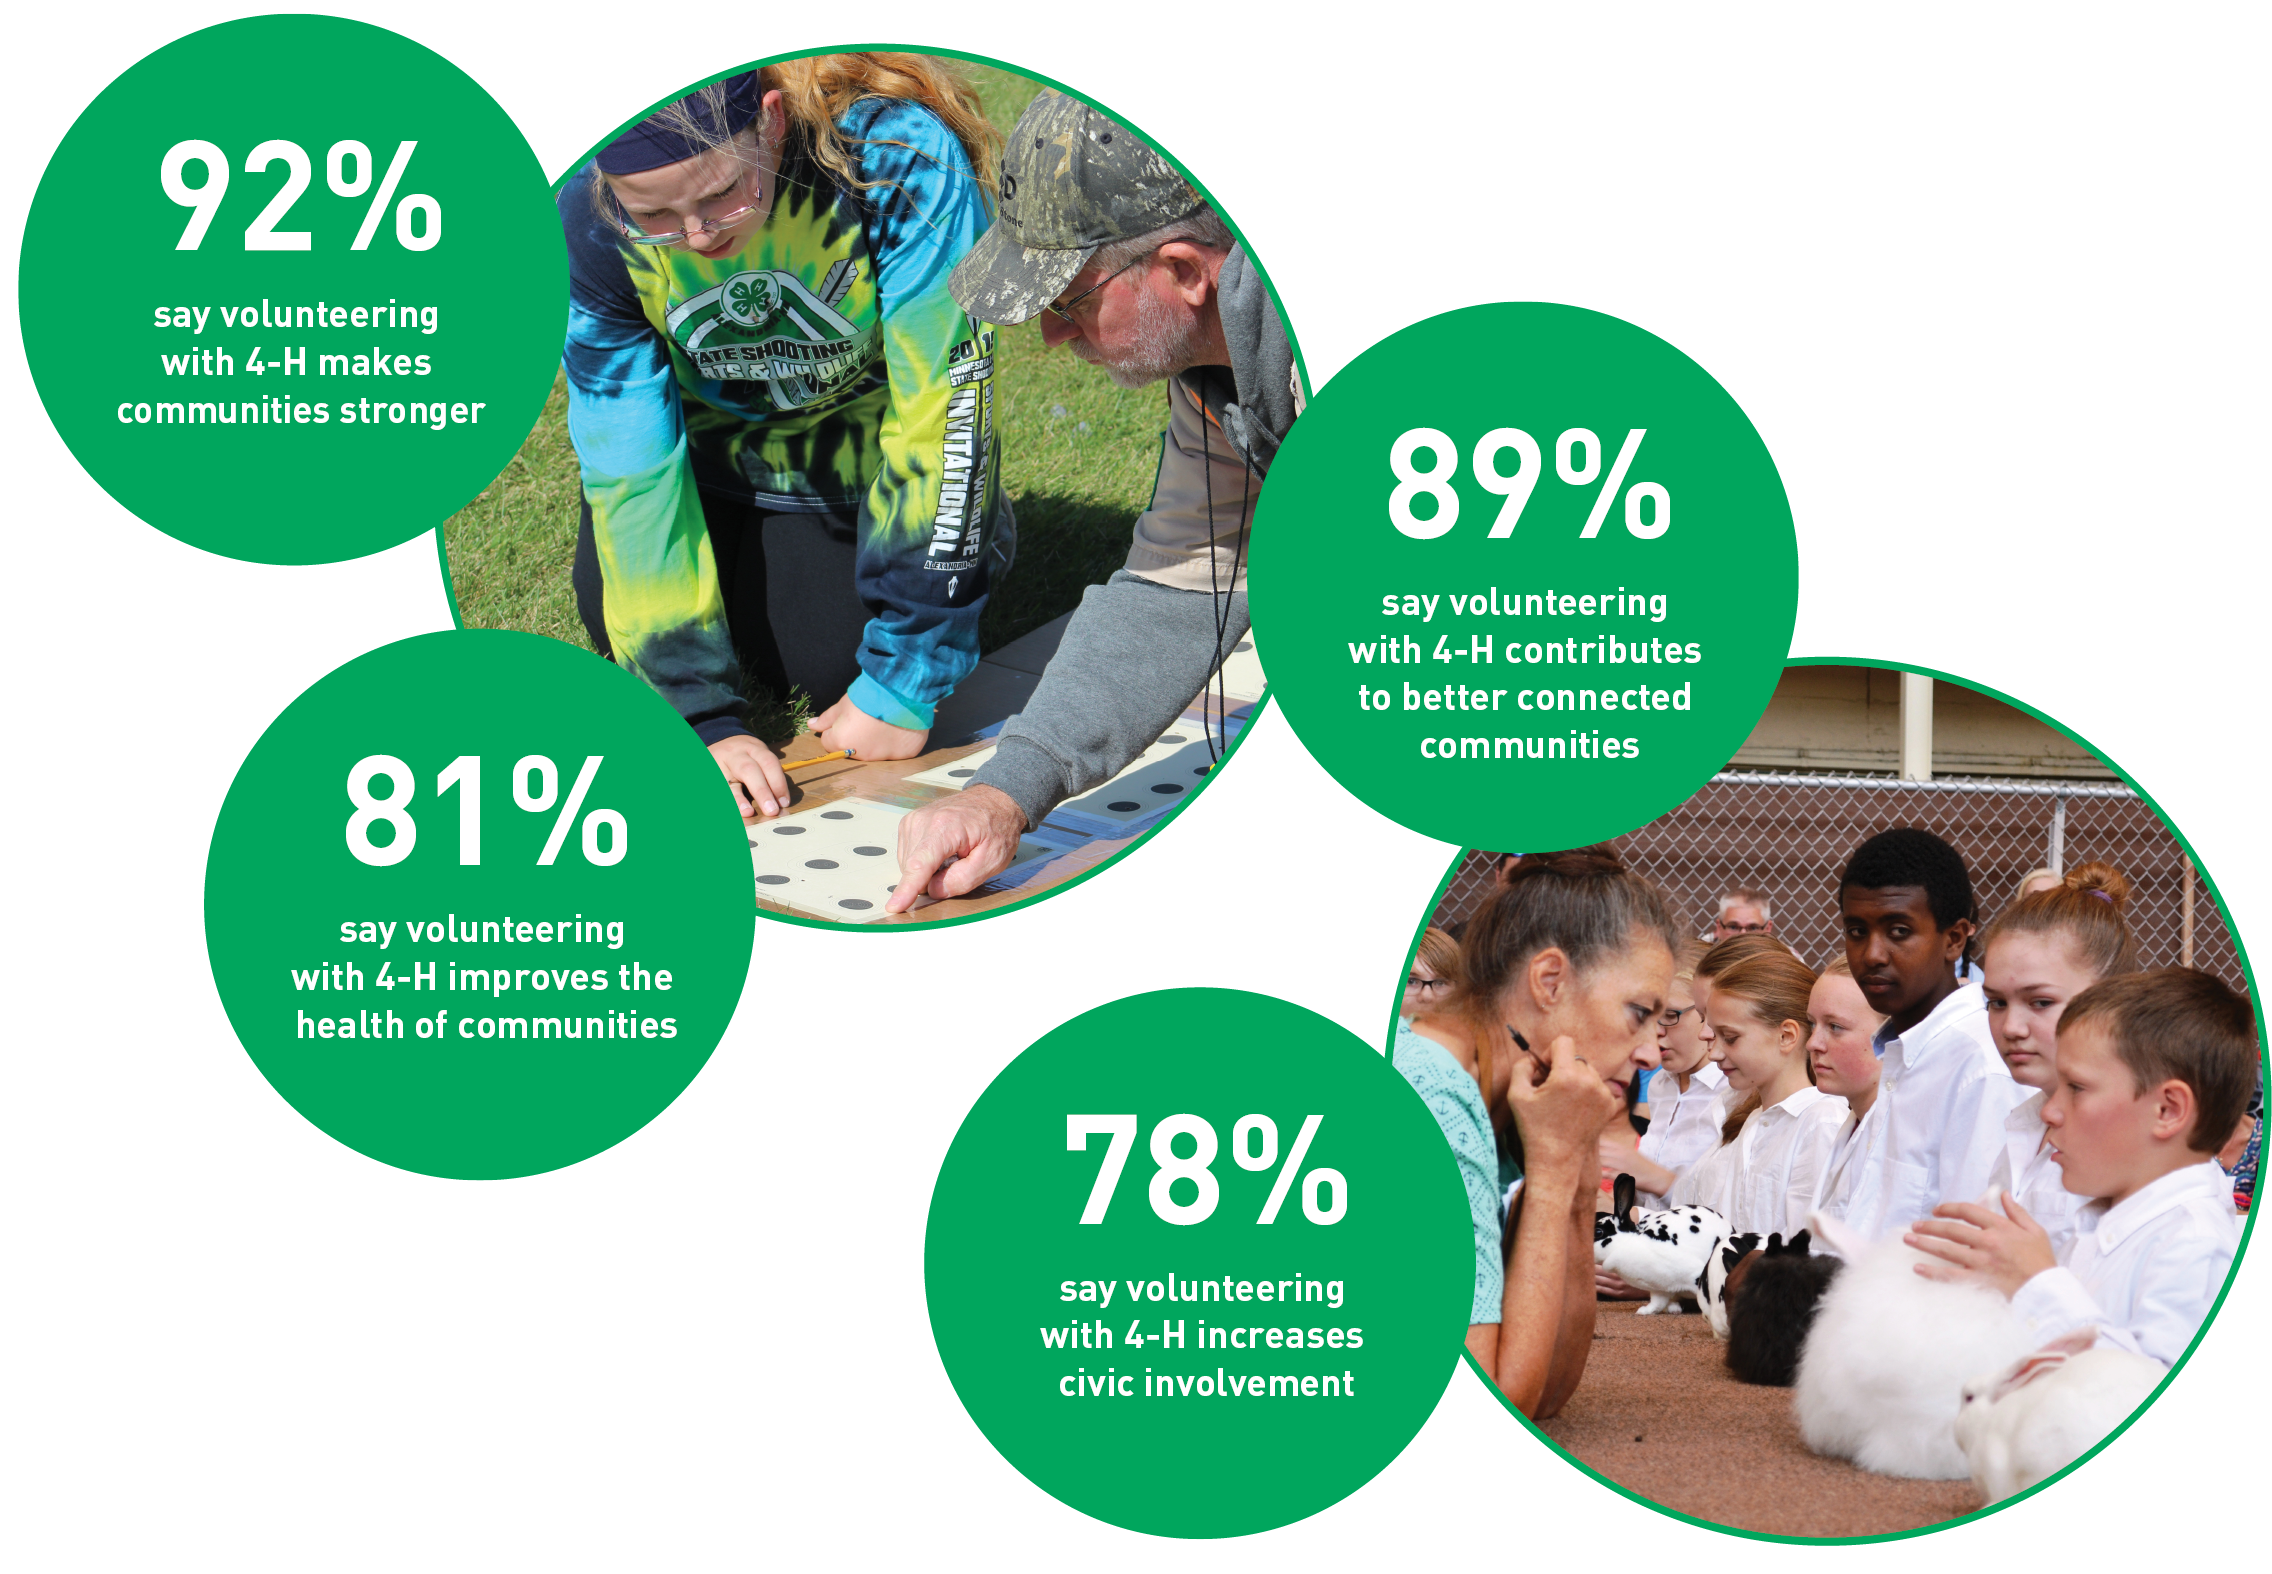 92% say volunteering makes communities stronger, 81% say improves health of communities, 89%  contributes to better connected communities, 78% increases civic involvement